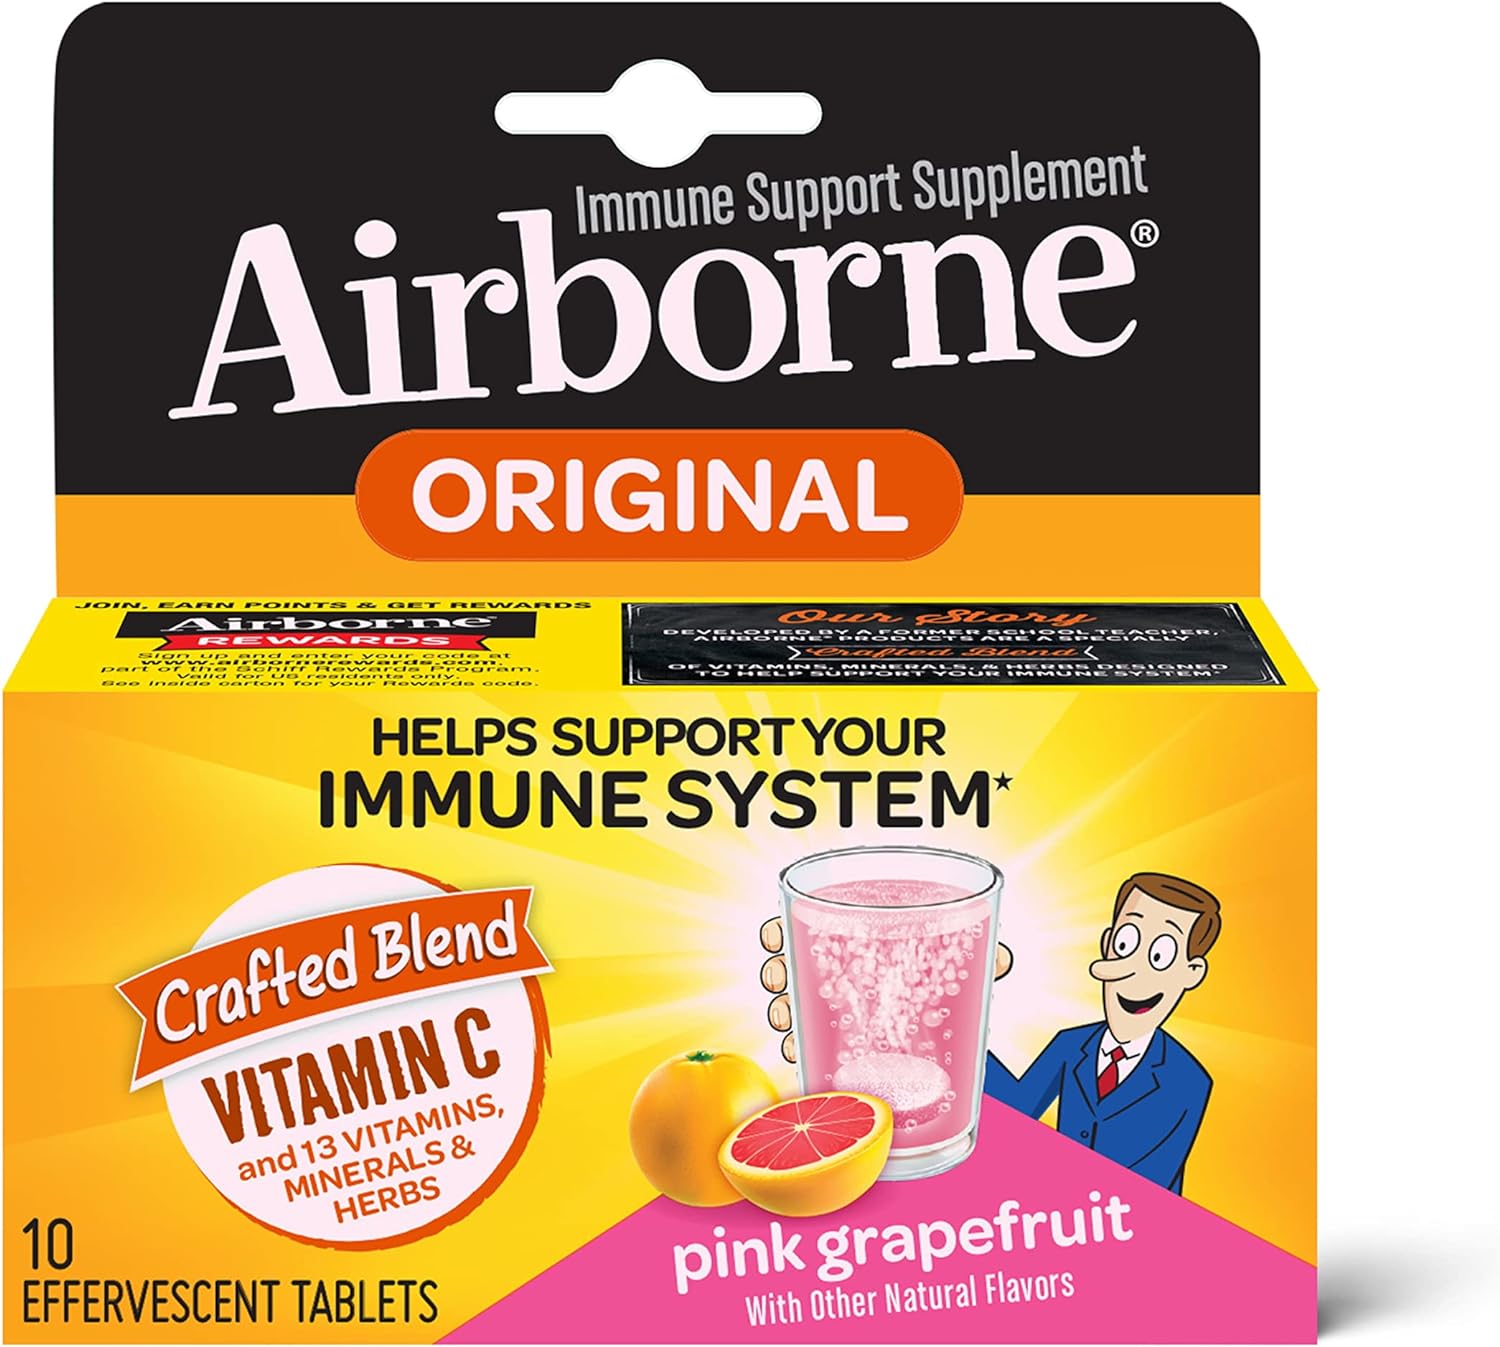 Airborne Pink Grapefruit Effervescent Tablets, 10 count - 1000mg of Vitamin C - Immune Support Supplement (Packaging May Vary) ( Pack of 4)